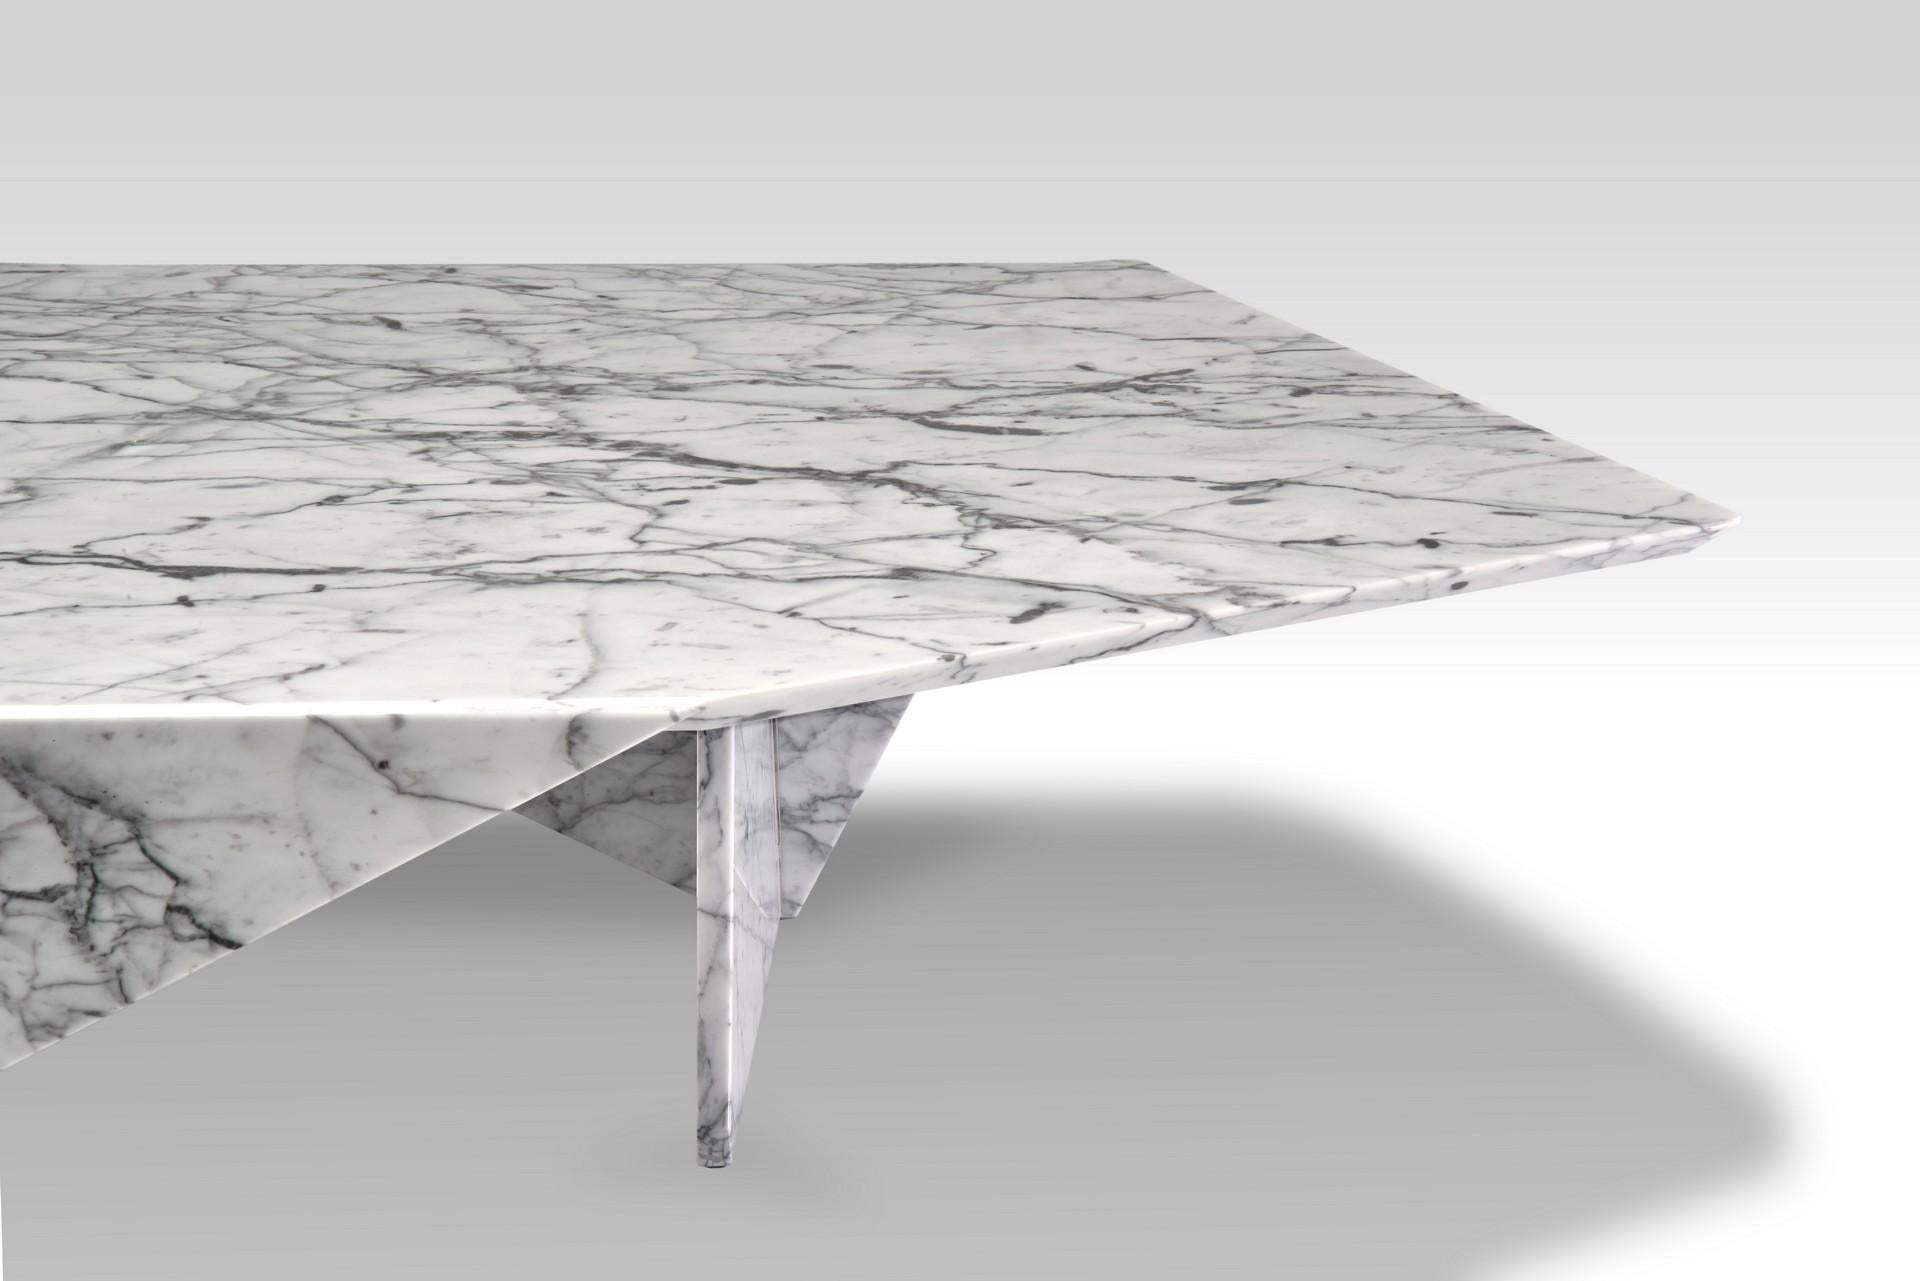 Giulio Lazzotti Coprimacchia authorized replica. Made under the author designer personal supervision in Pietrasanta.

The marble slab is cut so that the veins are continuous, giving the apparence that the marble slab was bent.
Everyone who will see